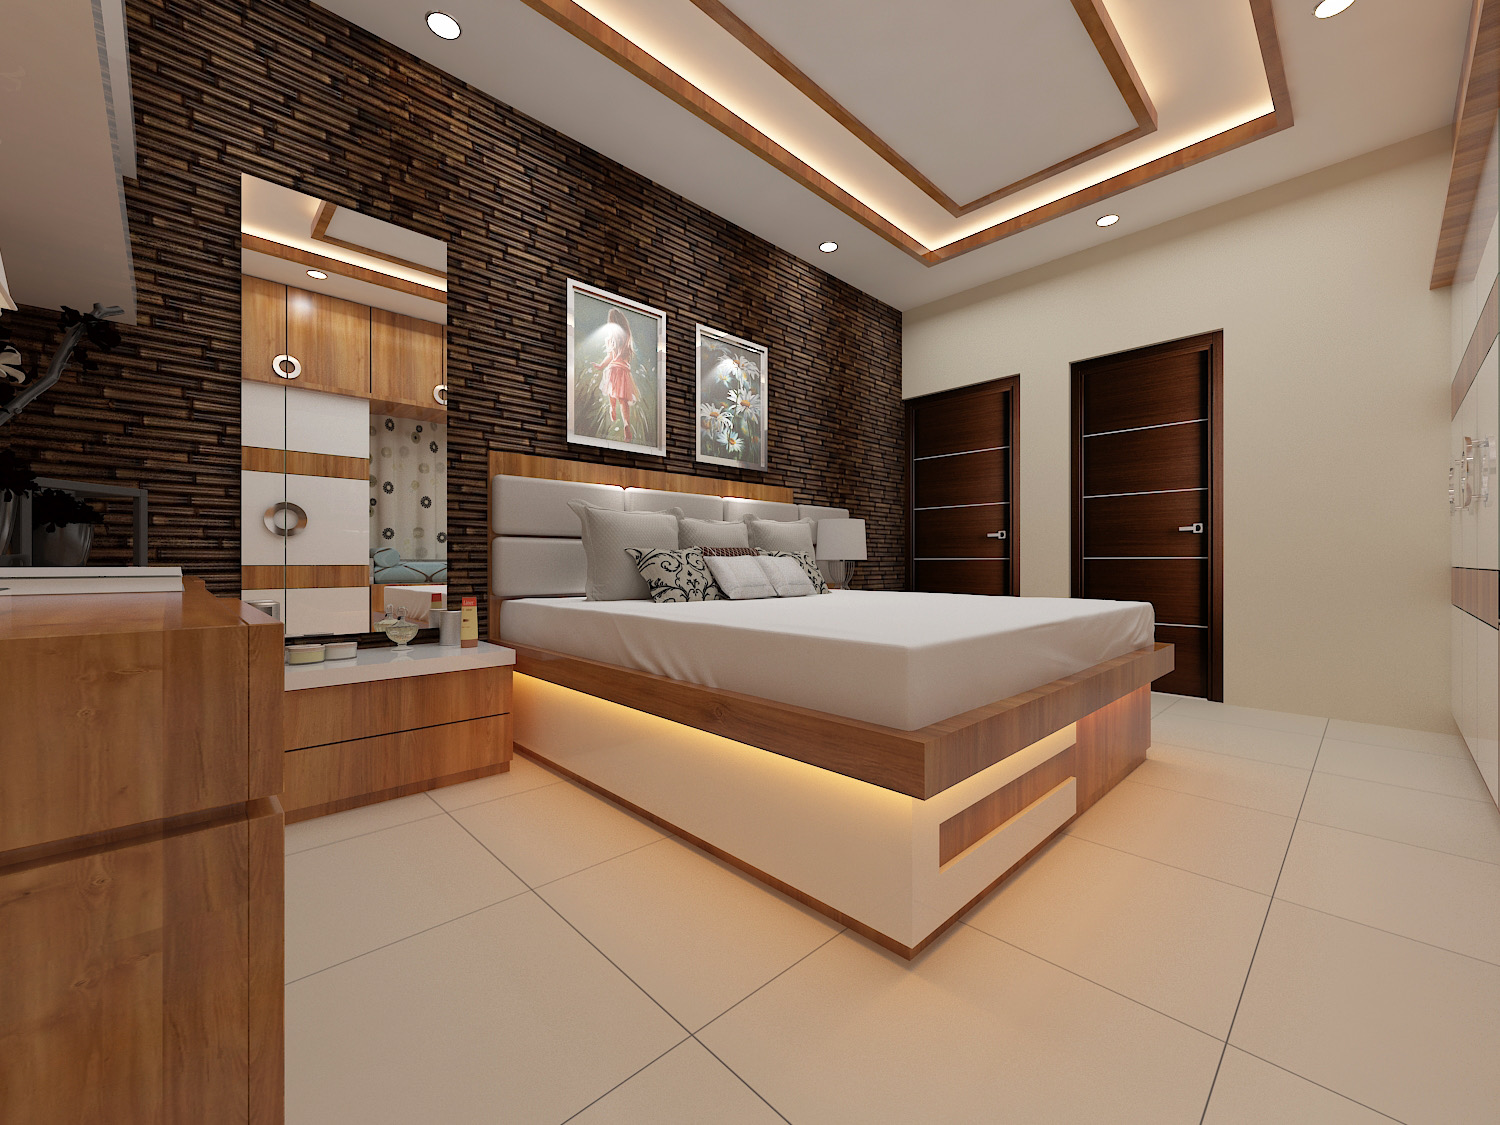 Bedroom Design And Wall Arts